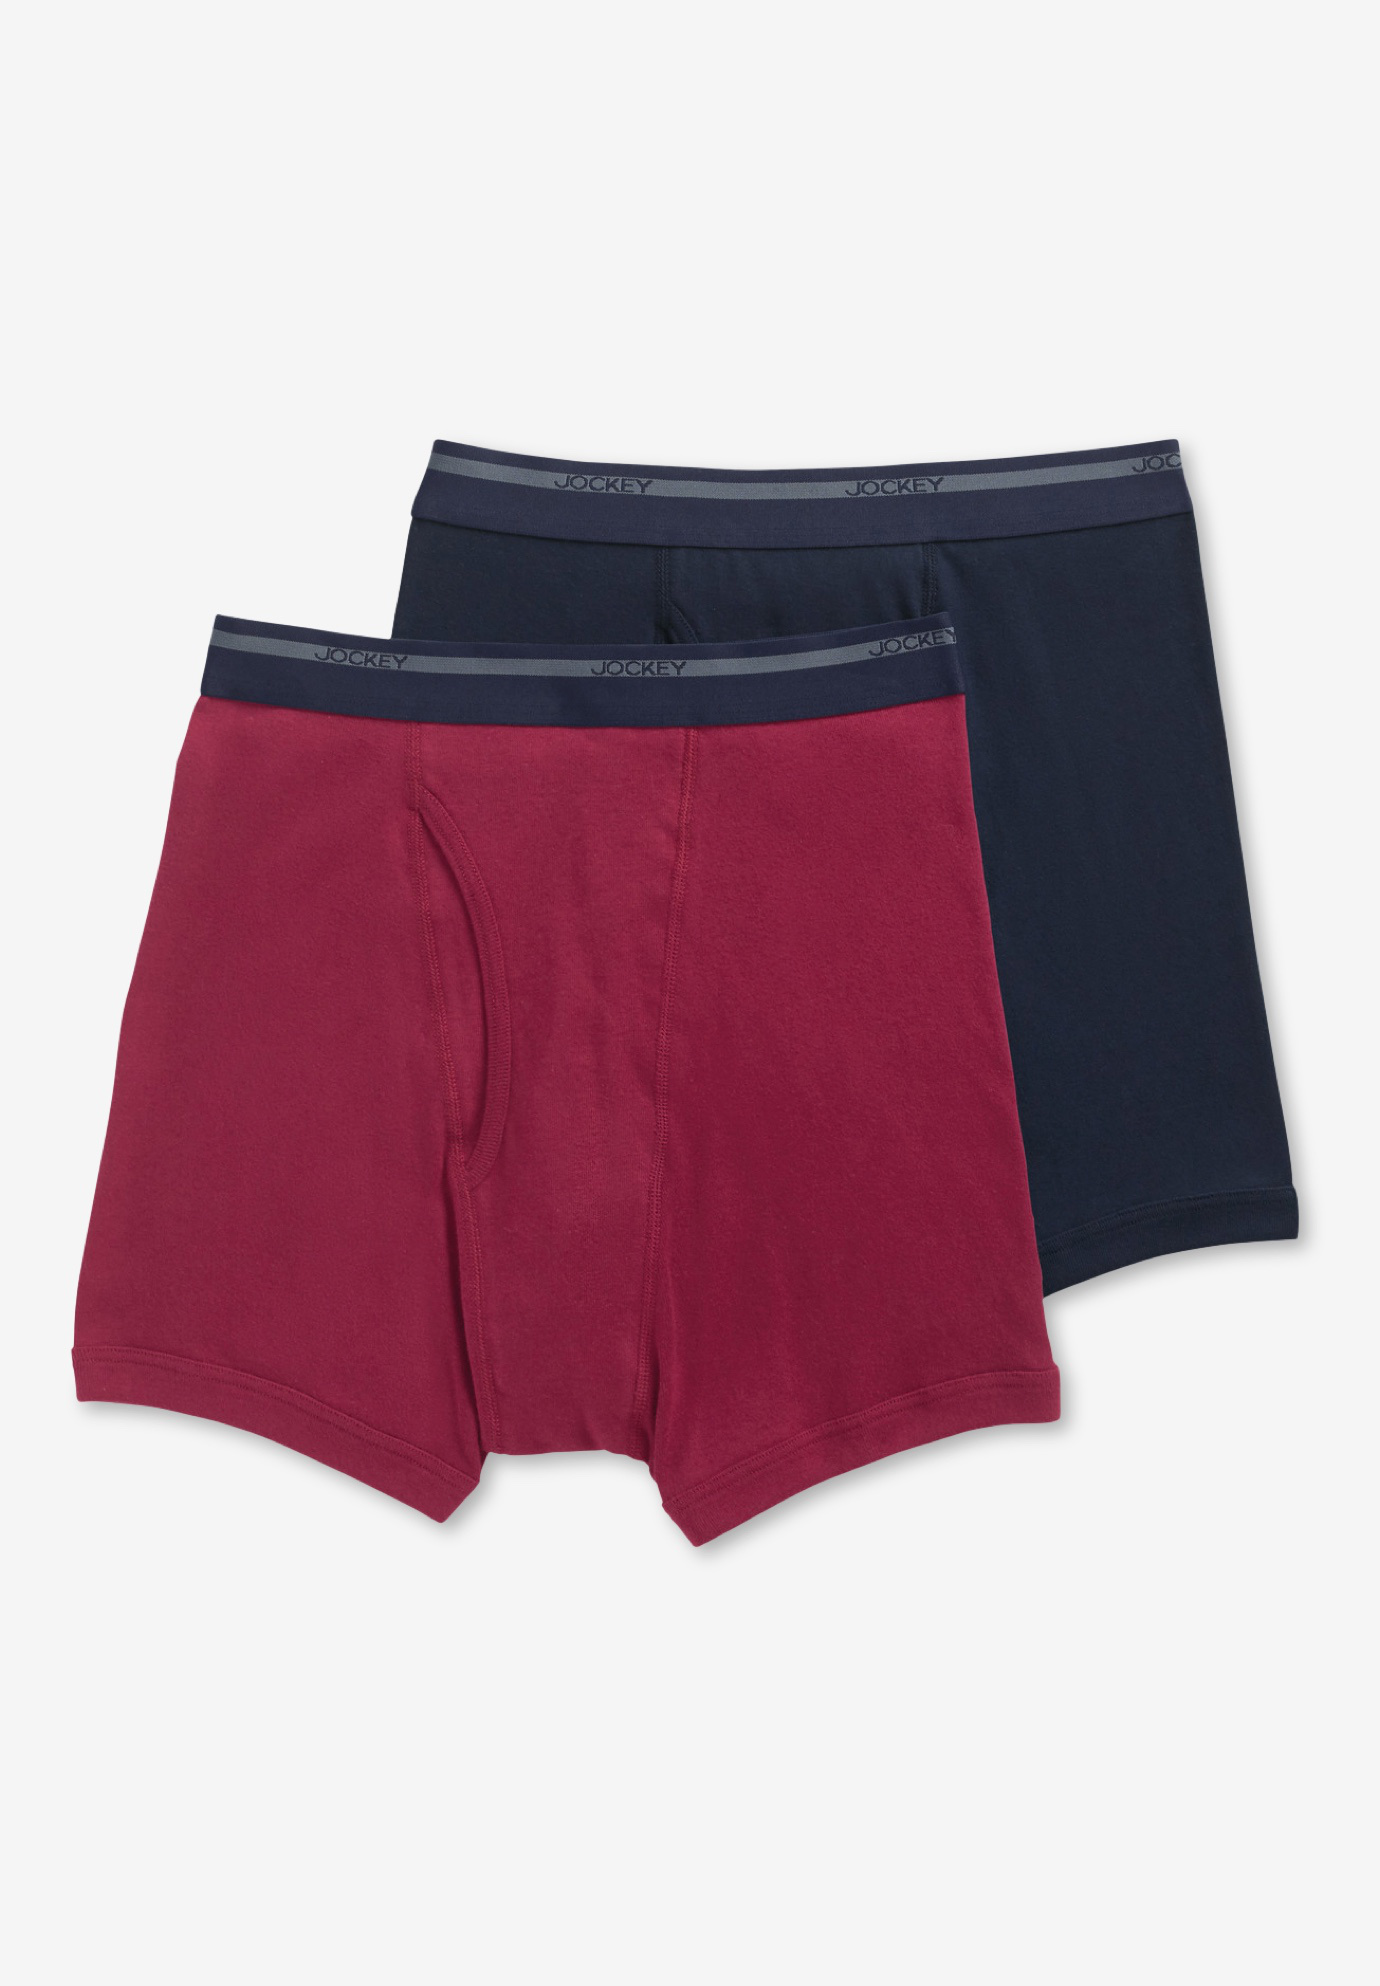 Jockey® Classic Boxer Brief 2-Pack | King Size